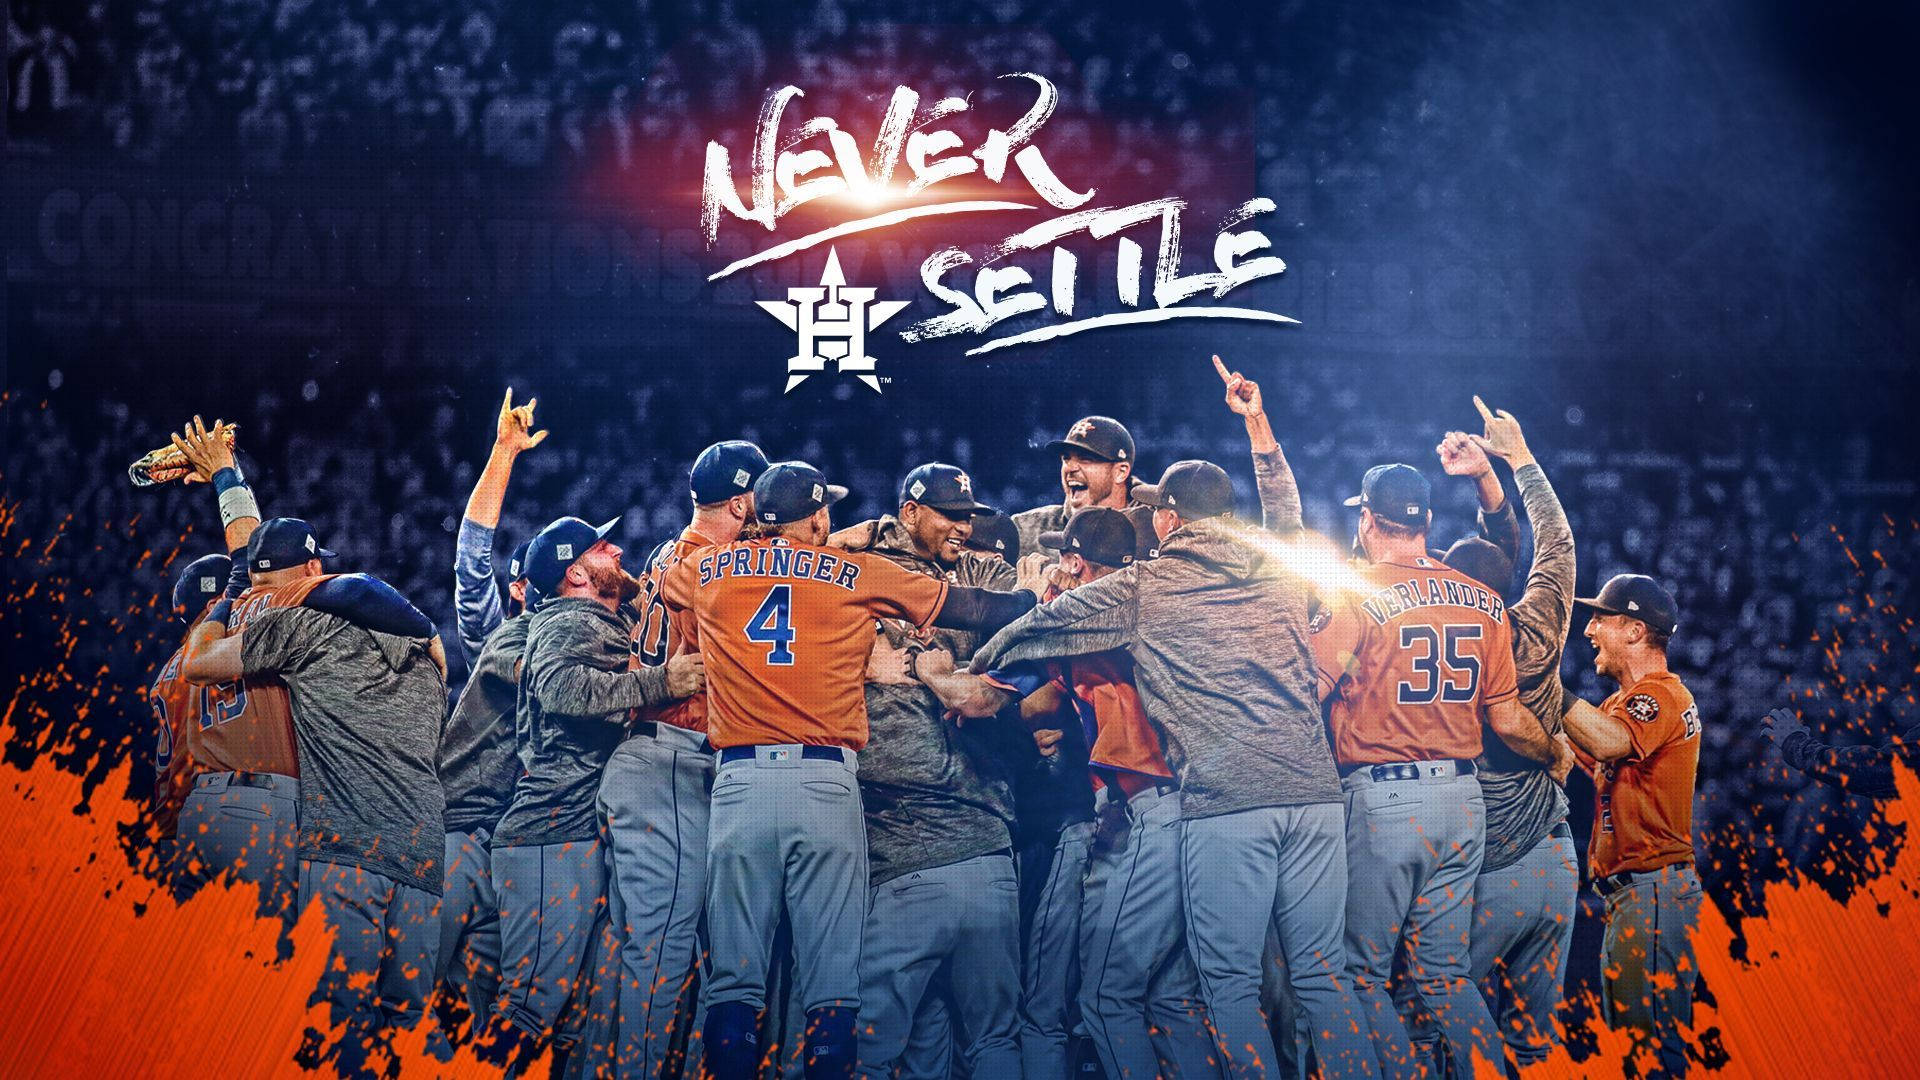 1920X1080 Houston Astros Wallpaper and Background